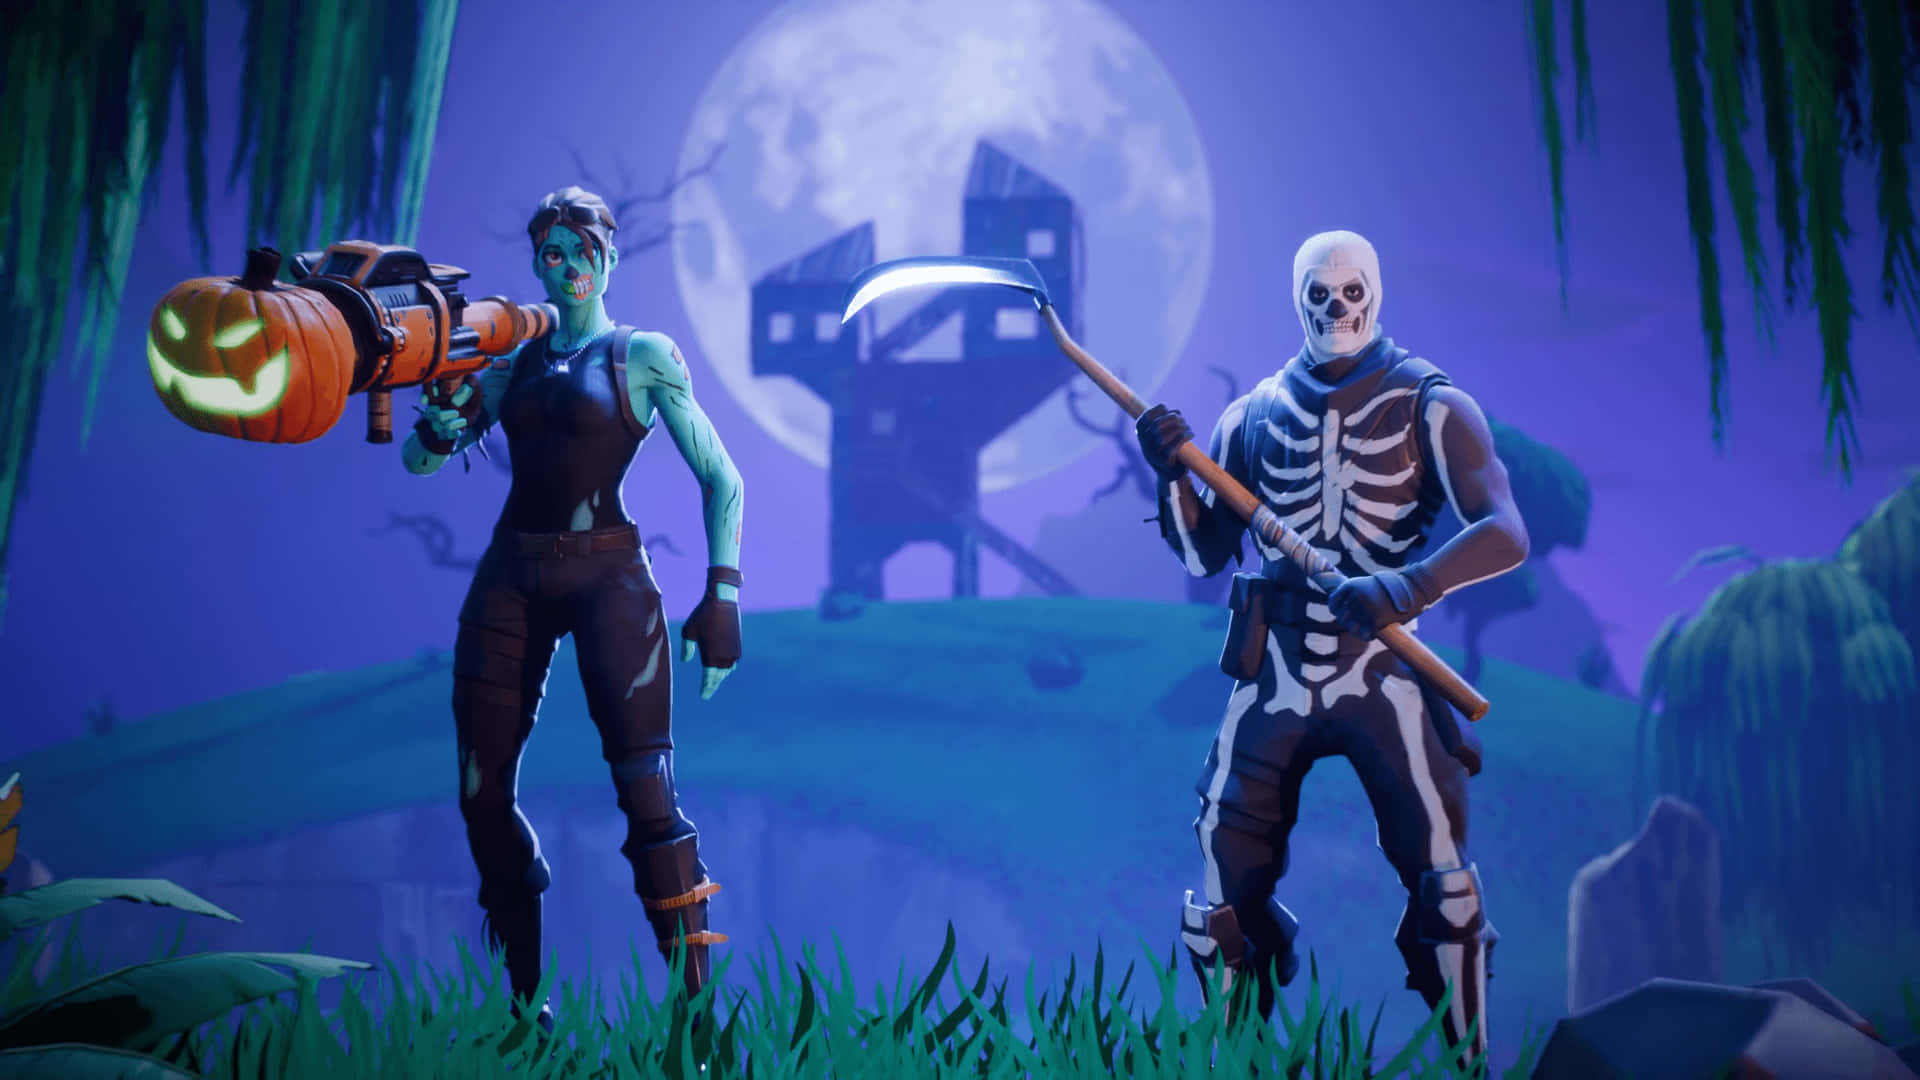 Two Skeletons In Front Of A Halloween Scene Wallpaper